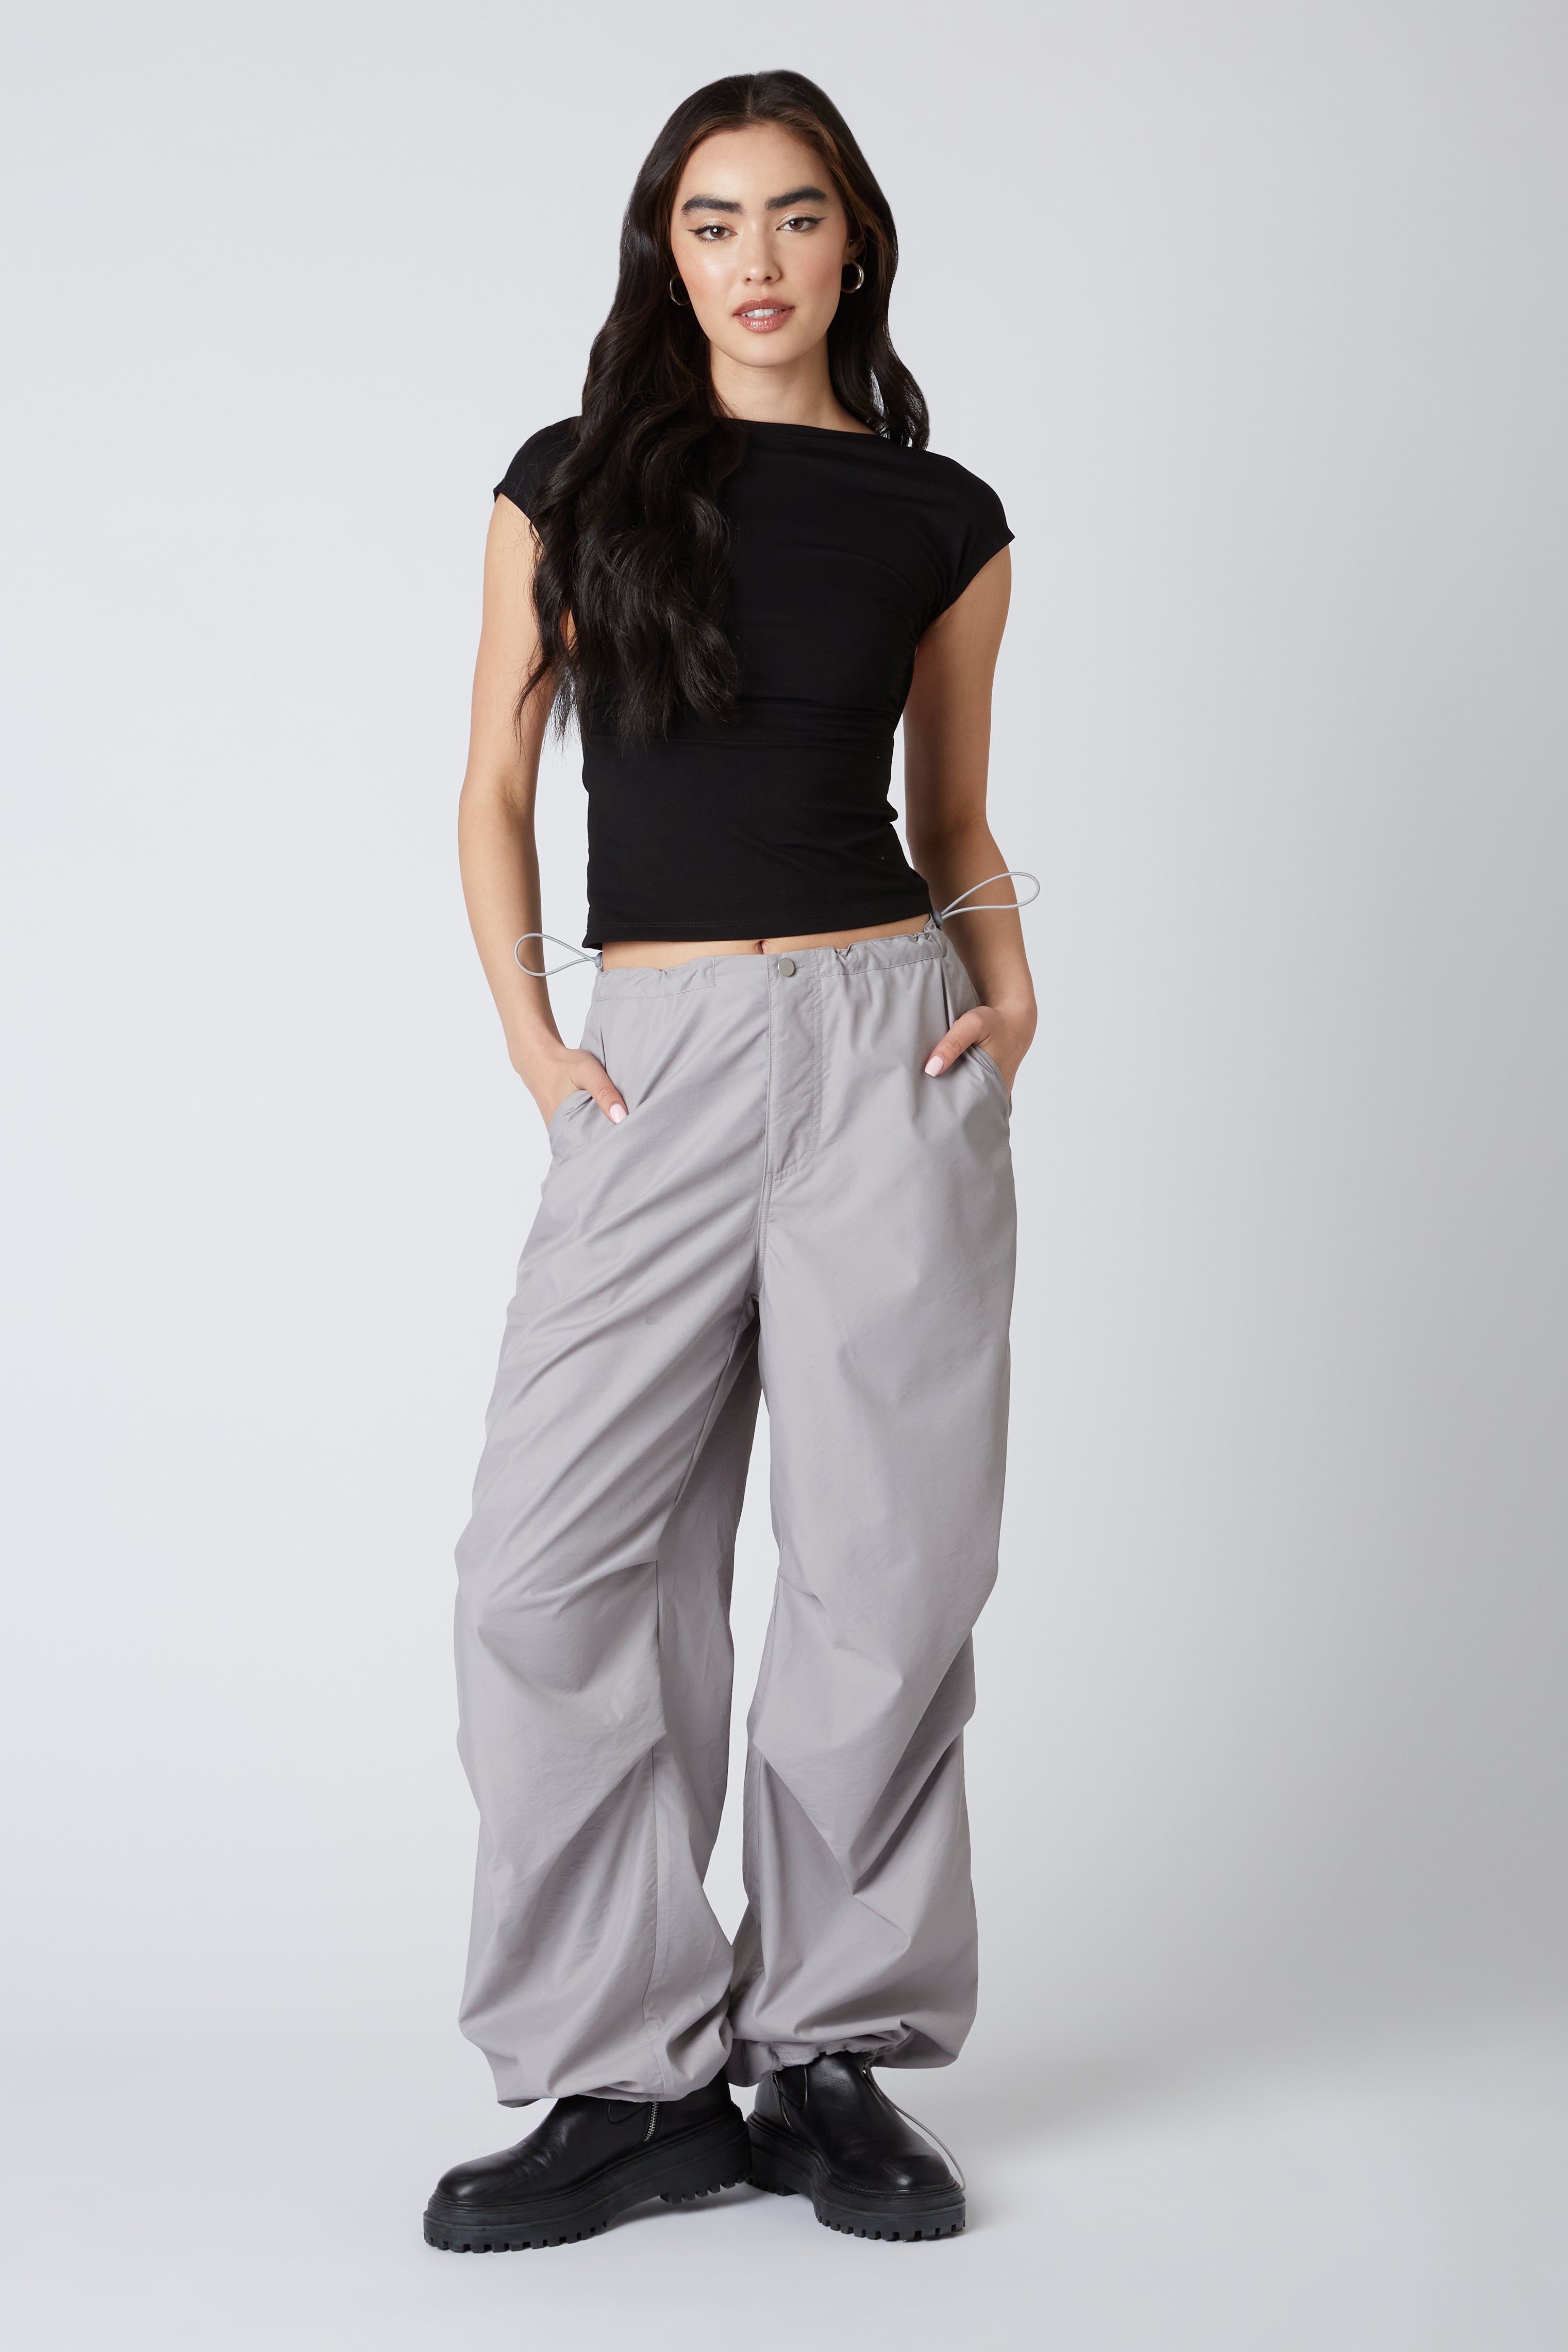 Swish Parachute Pant in Cement Front